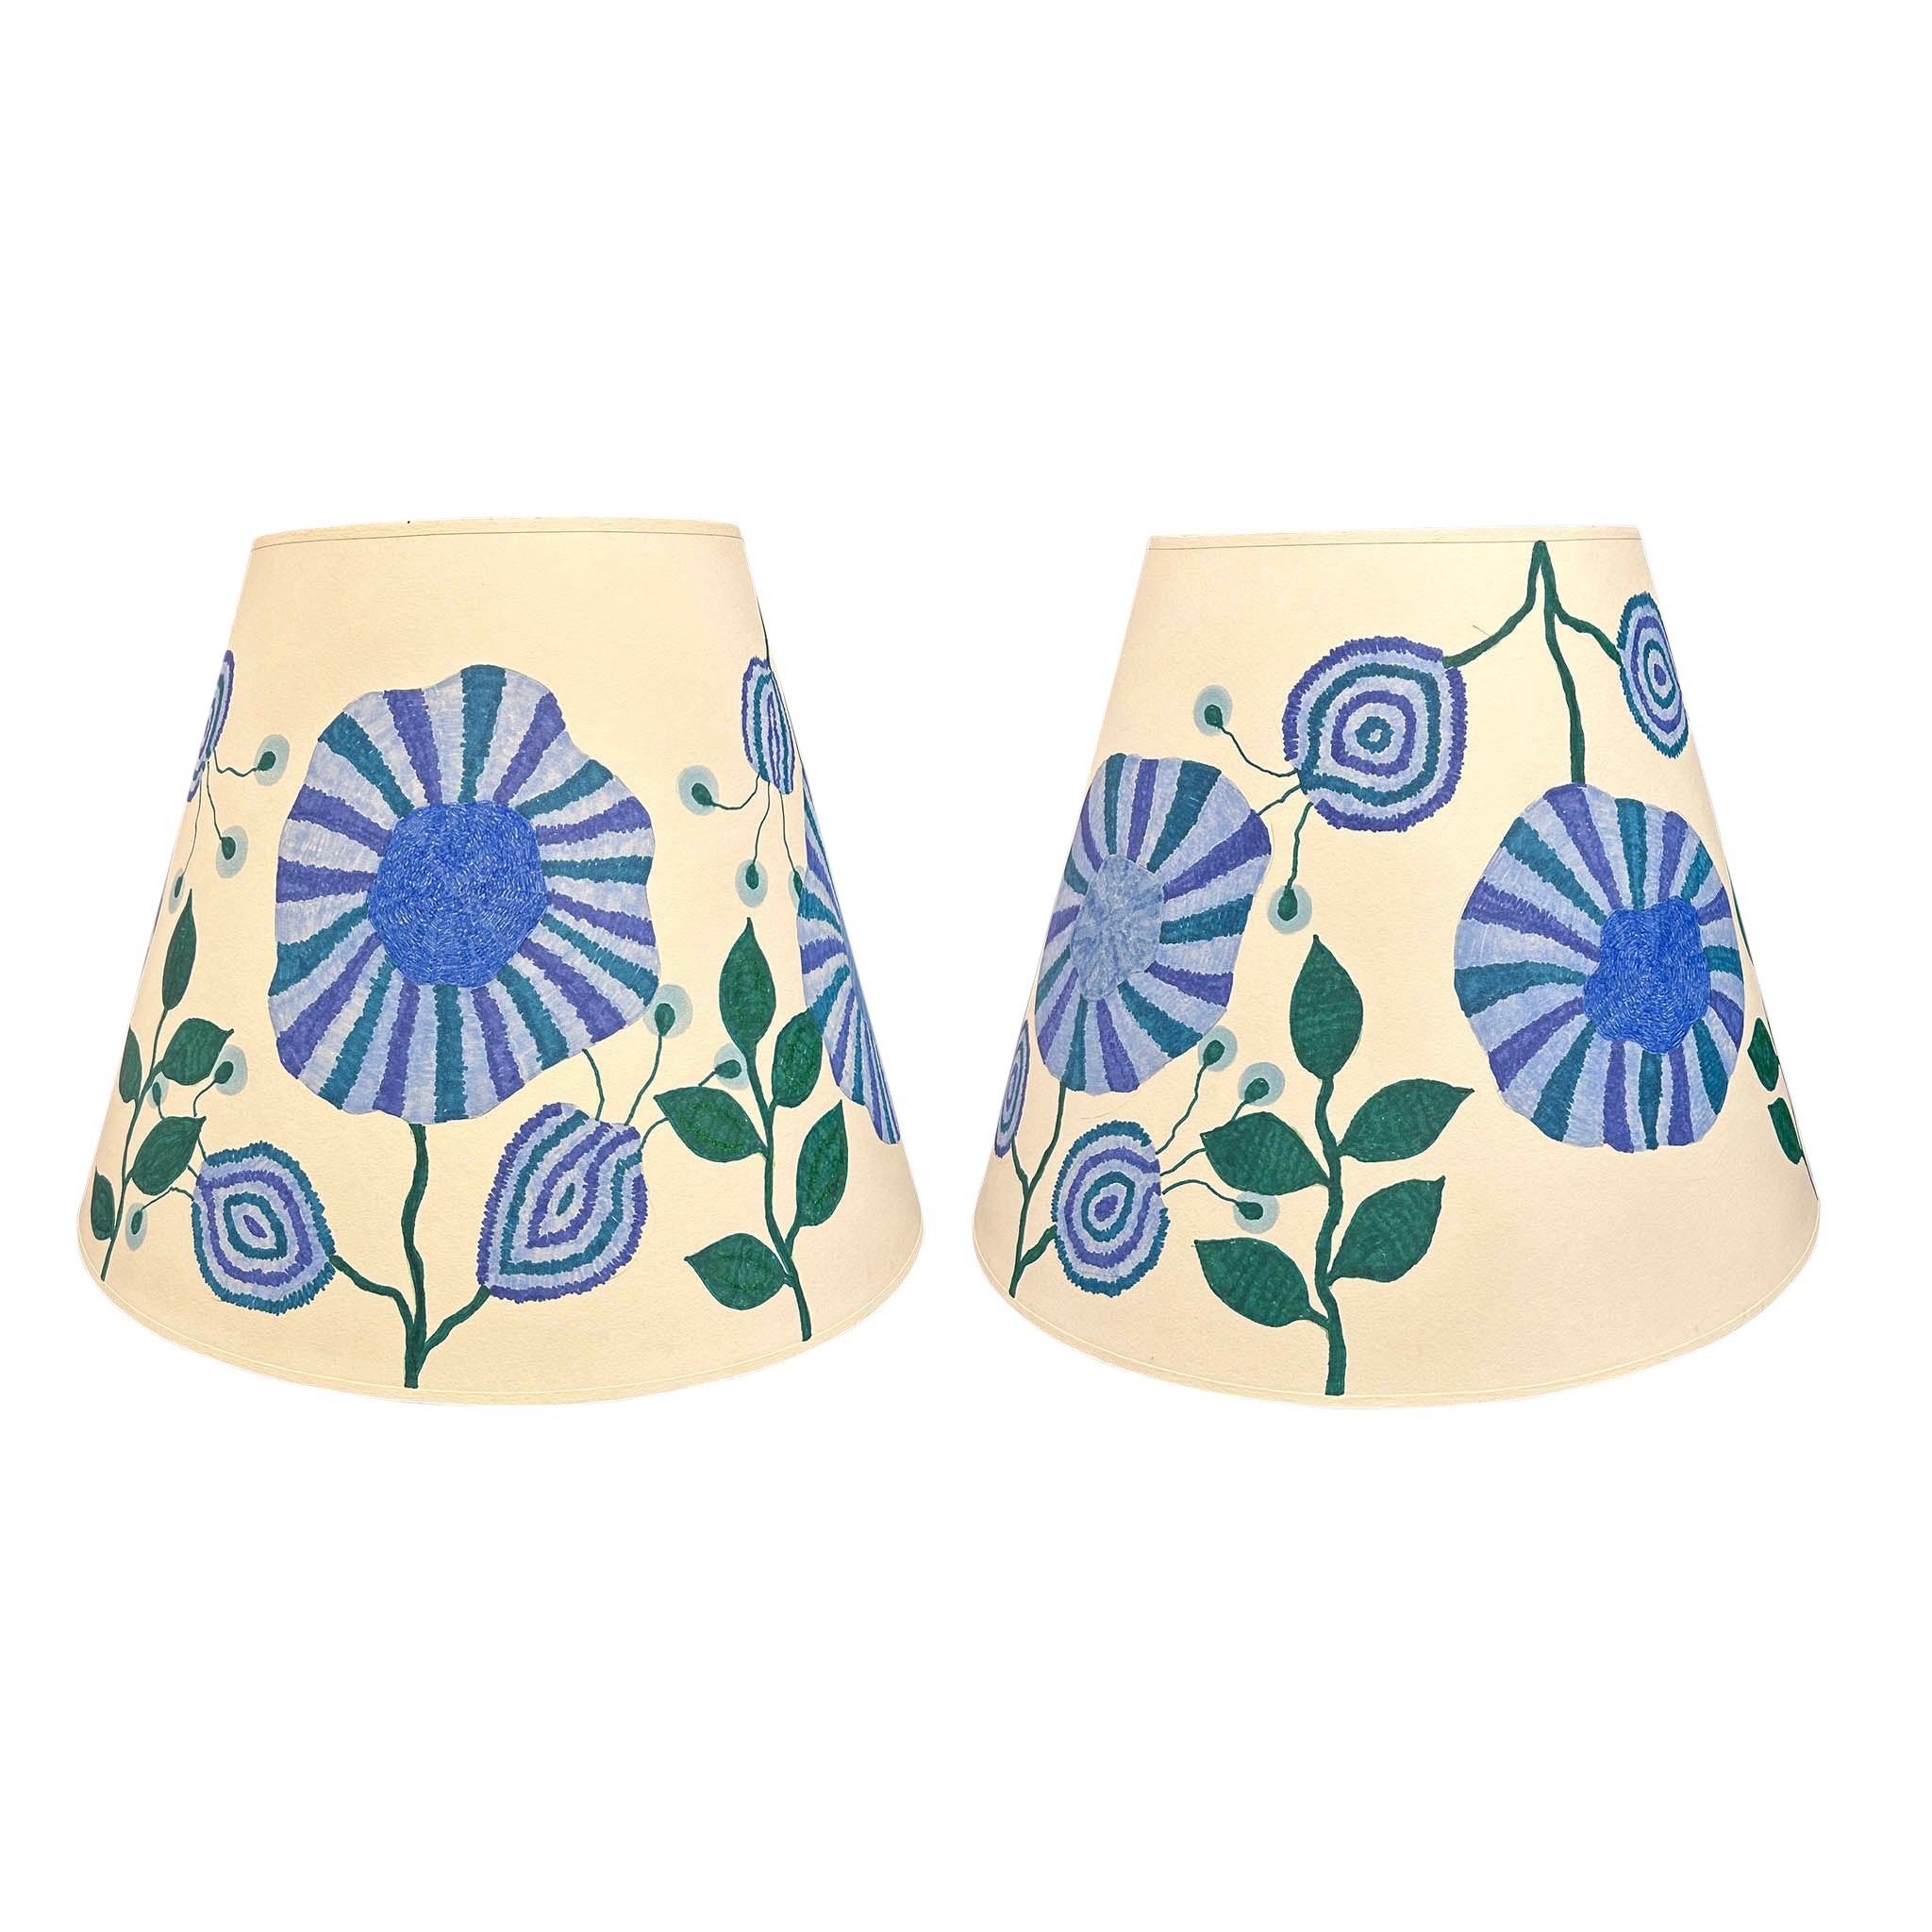 Pair of Hand-Decorated Lampshades with Blue Striped Floral